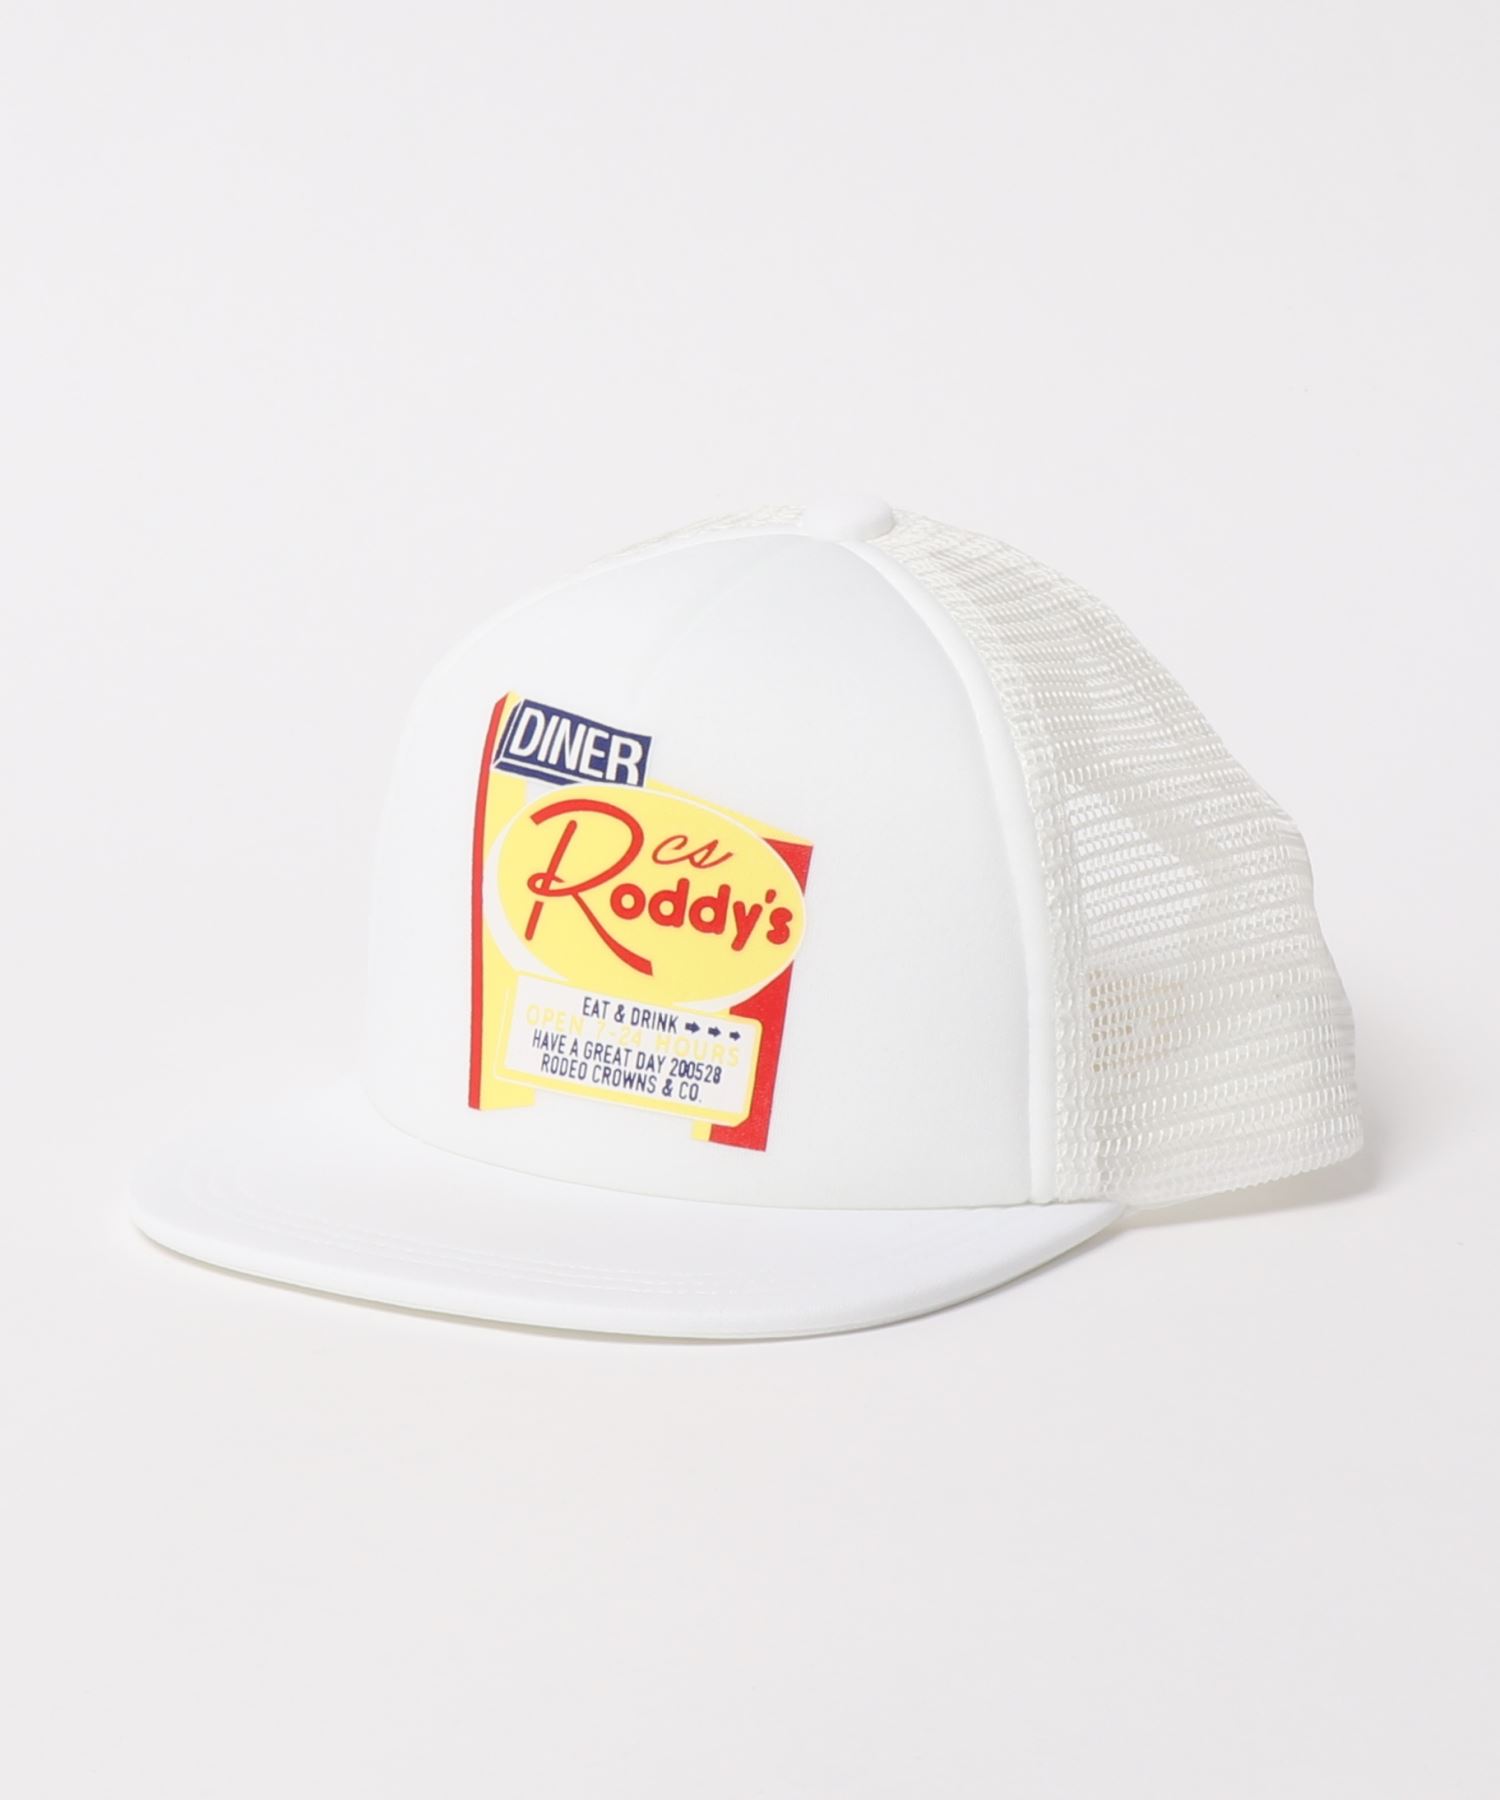 RODEO CROWNS WIDE 最新の激安 BOWLKIDS 2021年最新入荷 CAP DINER 0528